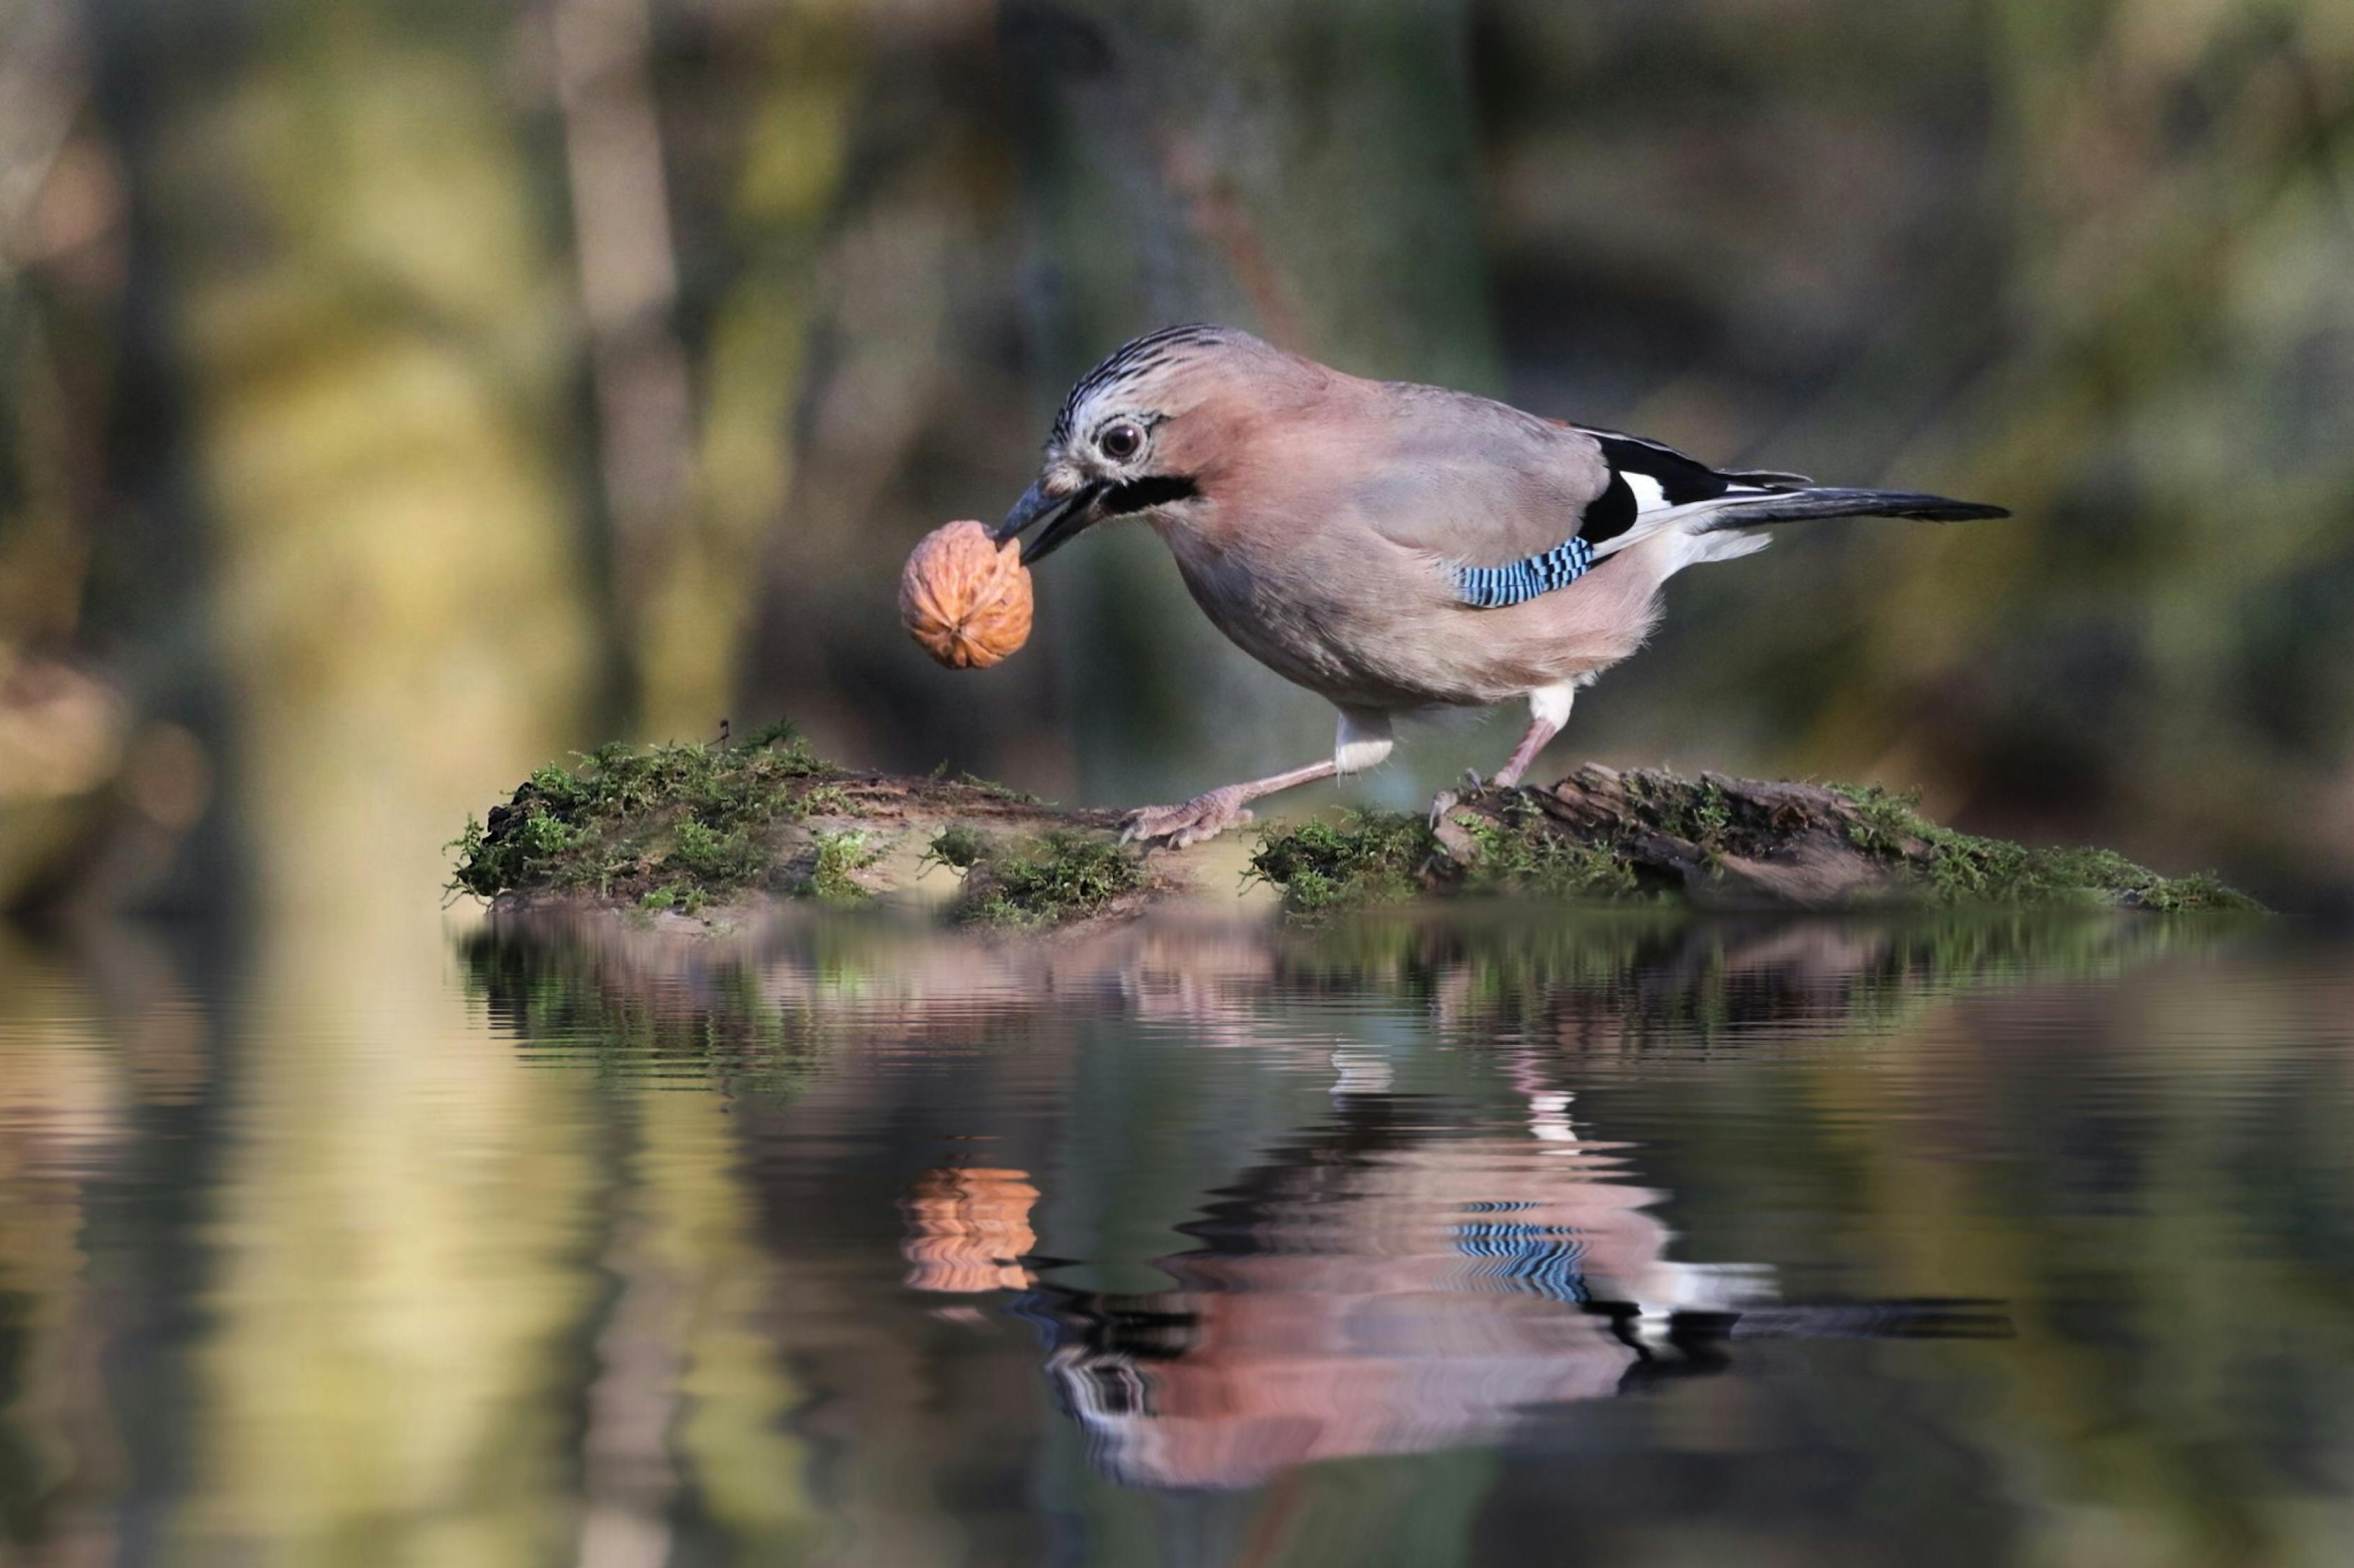 Cute Jay bird with gray plumage and blue feathers on wings holding walnut in beak while standing on twig on pond and reflecting on calm water